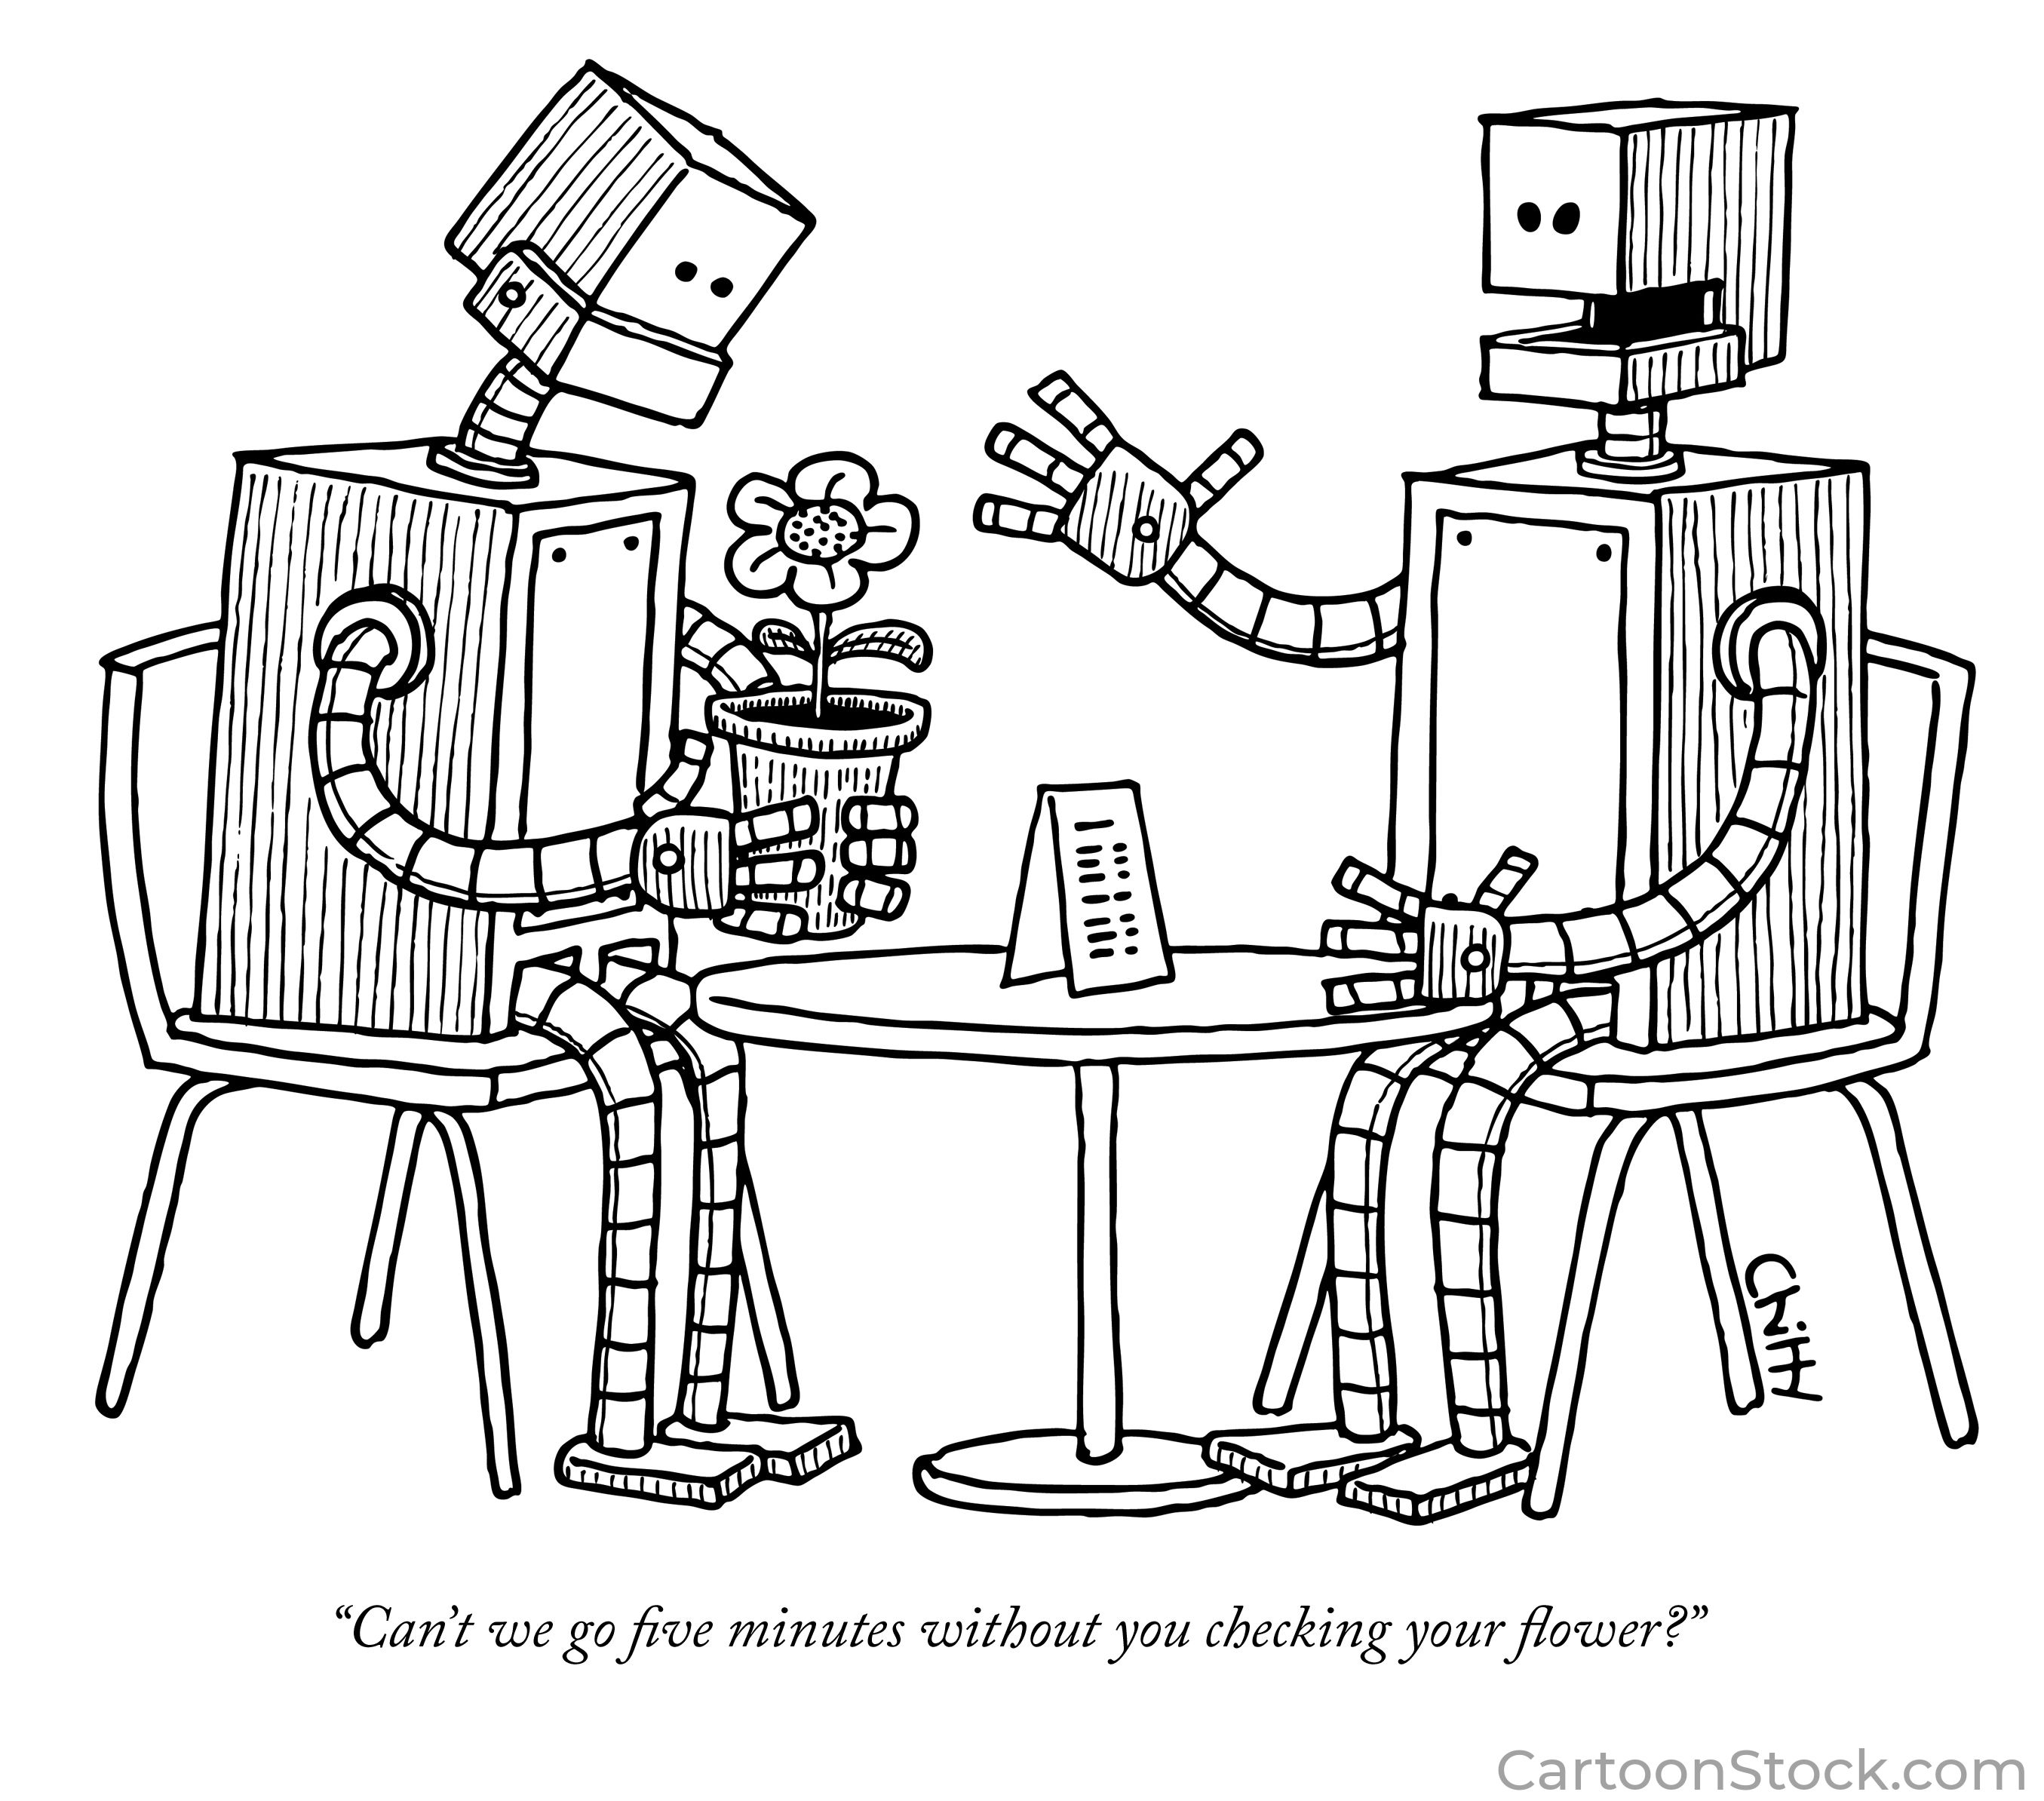 One robot is looking at a flowerpot in its hands.  The other robot says, 'can't we go five minutes without you checking your flower?'